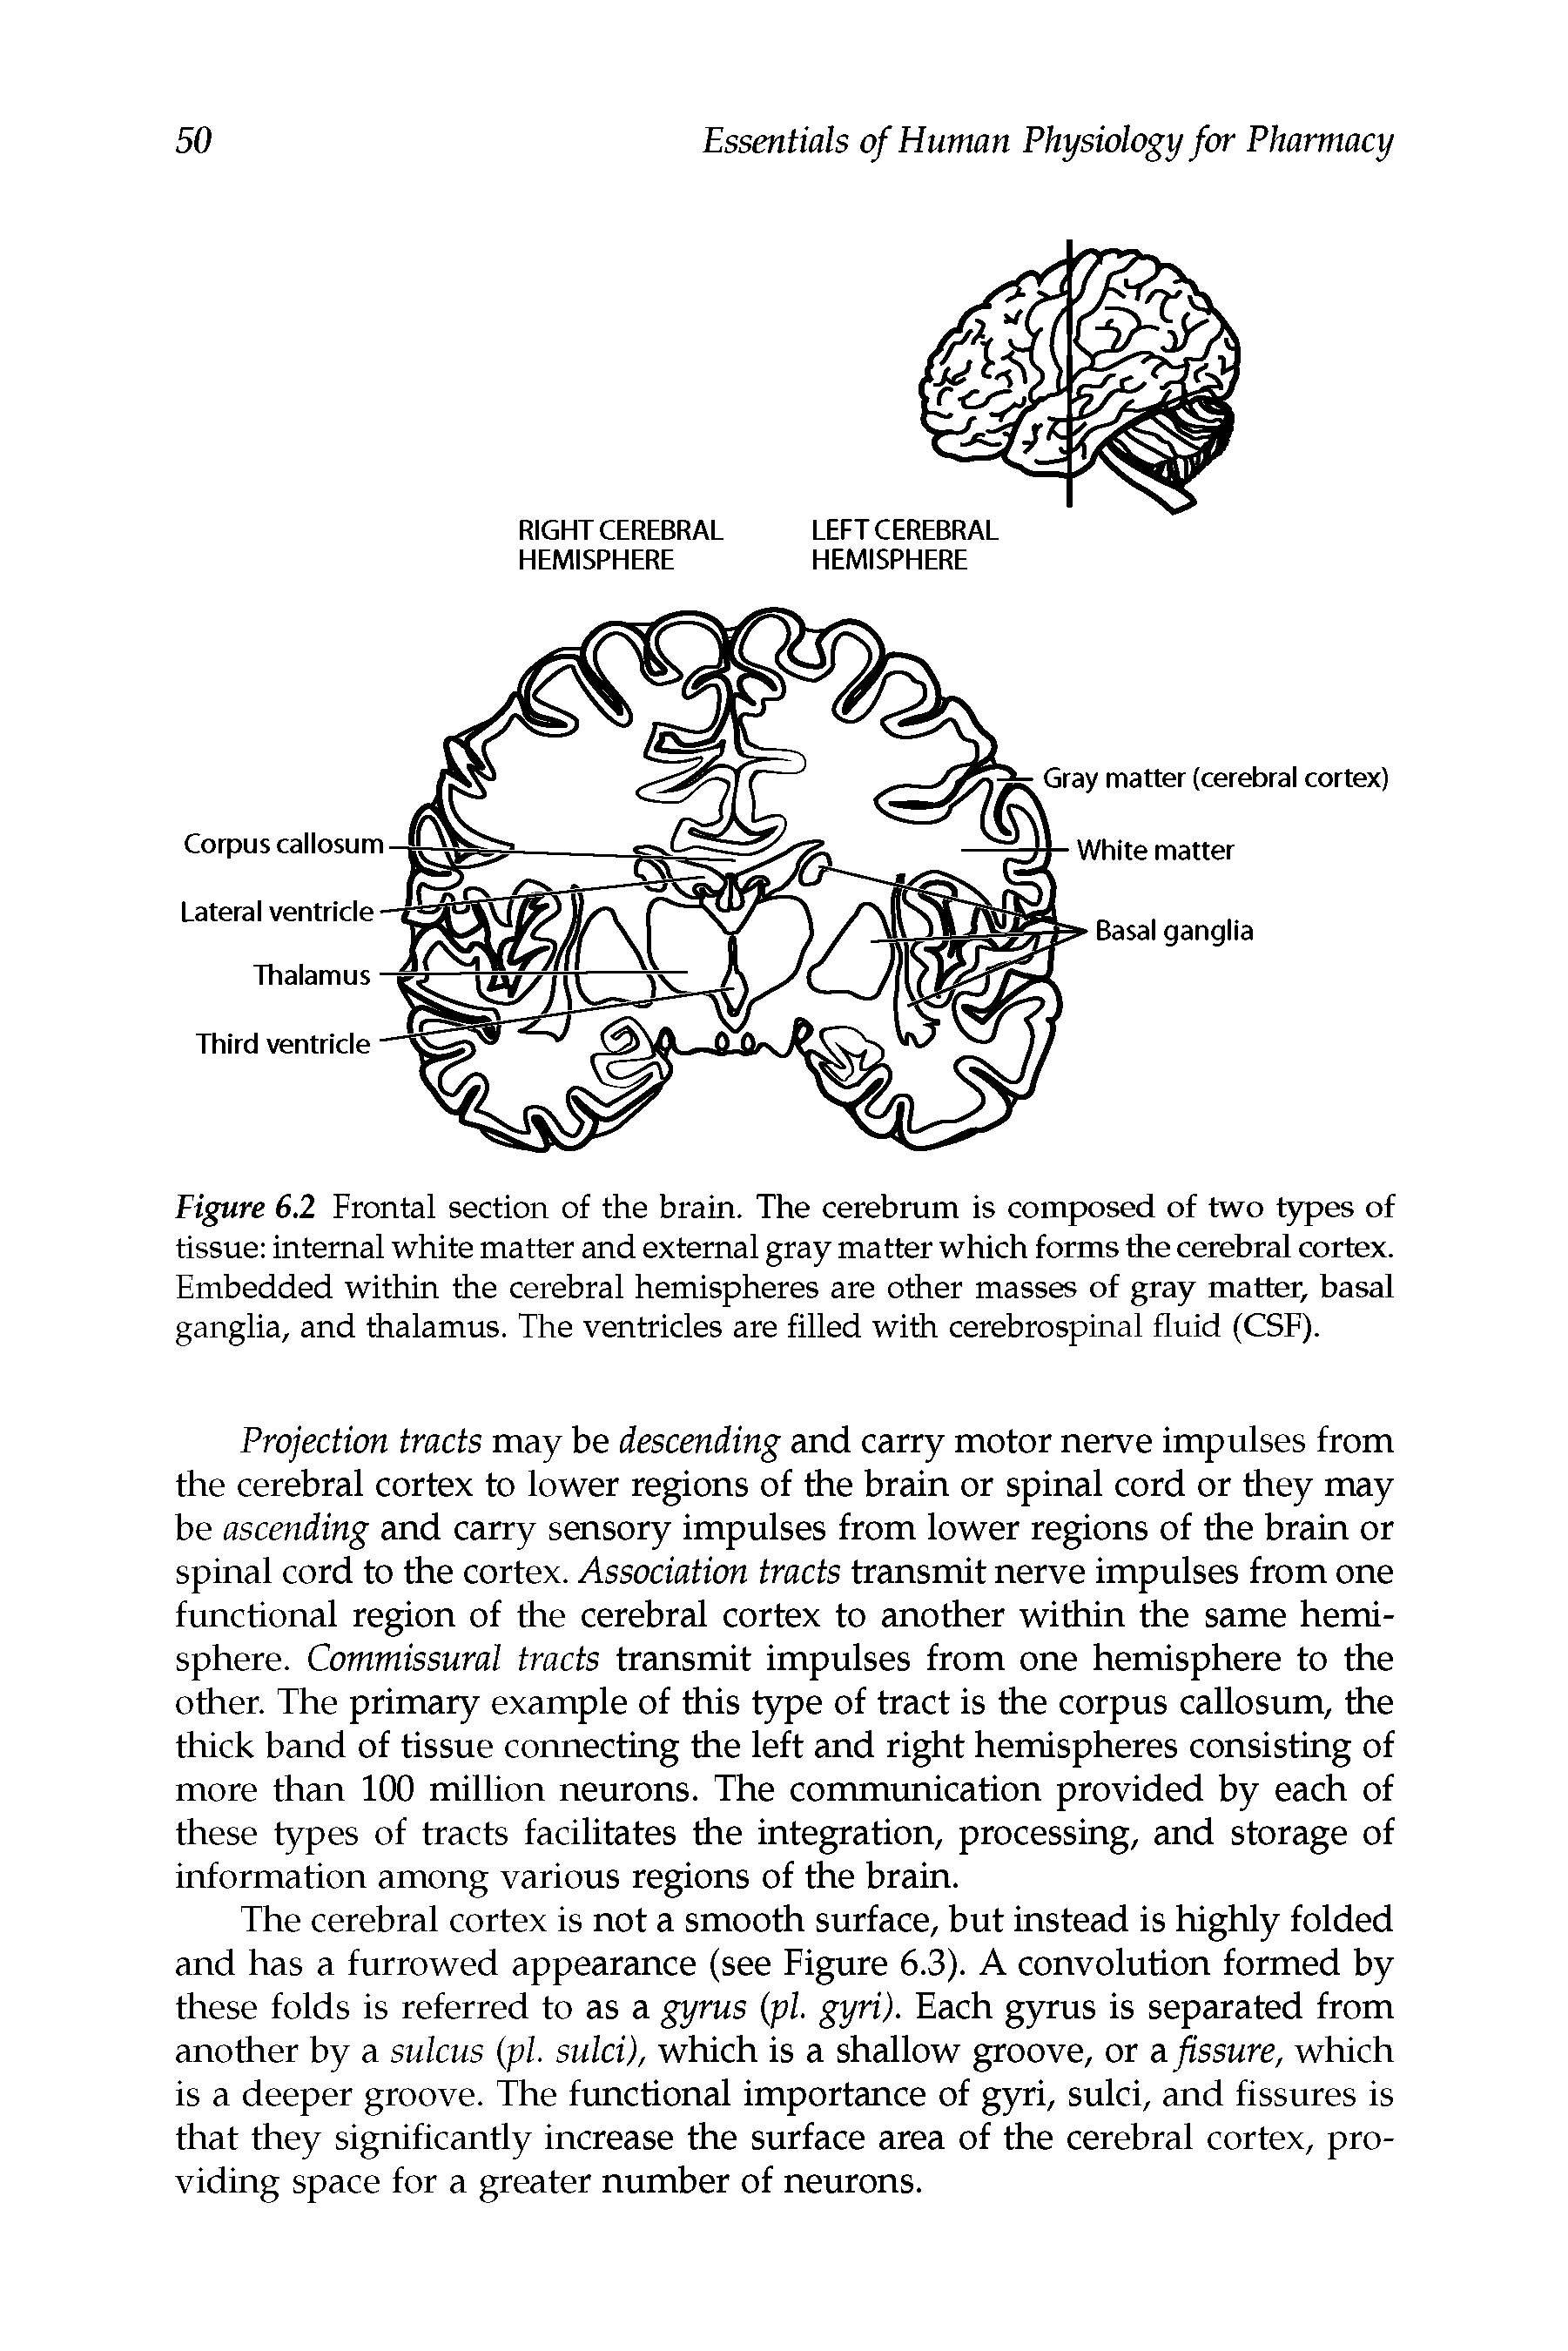 Figure 6.2 Frontal section of the brain. The cerebrum is composed of two types of tissue internal white matter and external gray matter which forms the cerebral cortex. Embedded within the cerebral hemispheres are other masses of gray matter, basal ganglia, and thalamus. The ventricles are filled with cerebrospinal fluid (CSF).